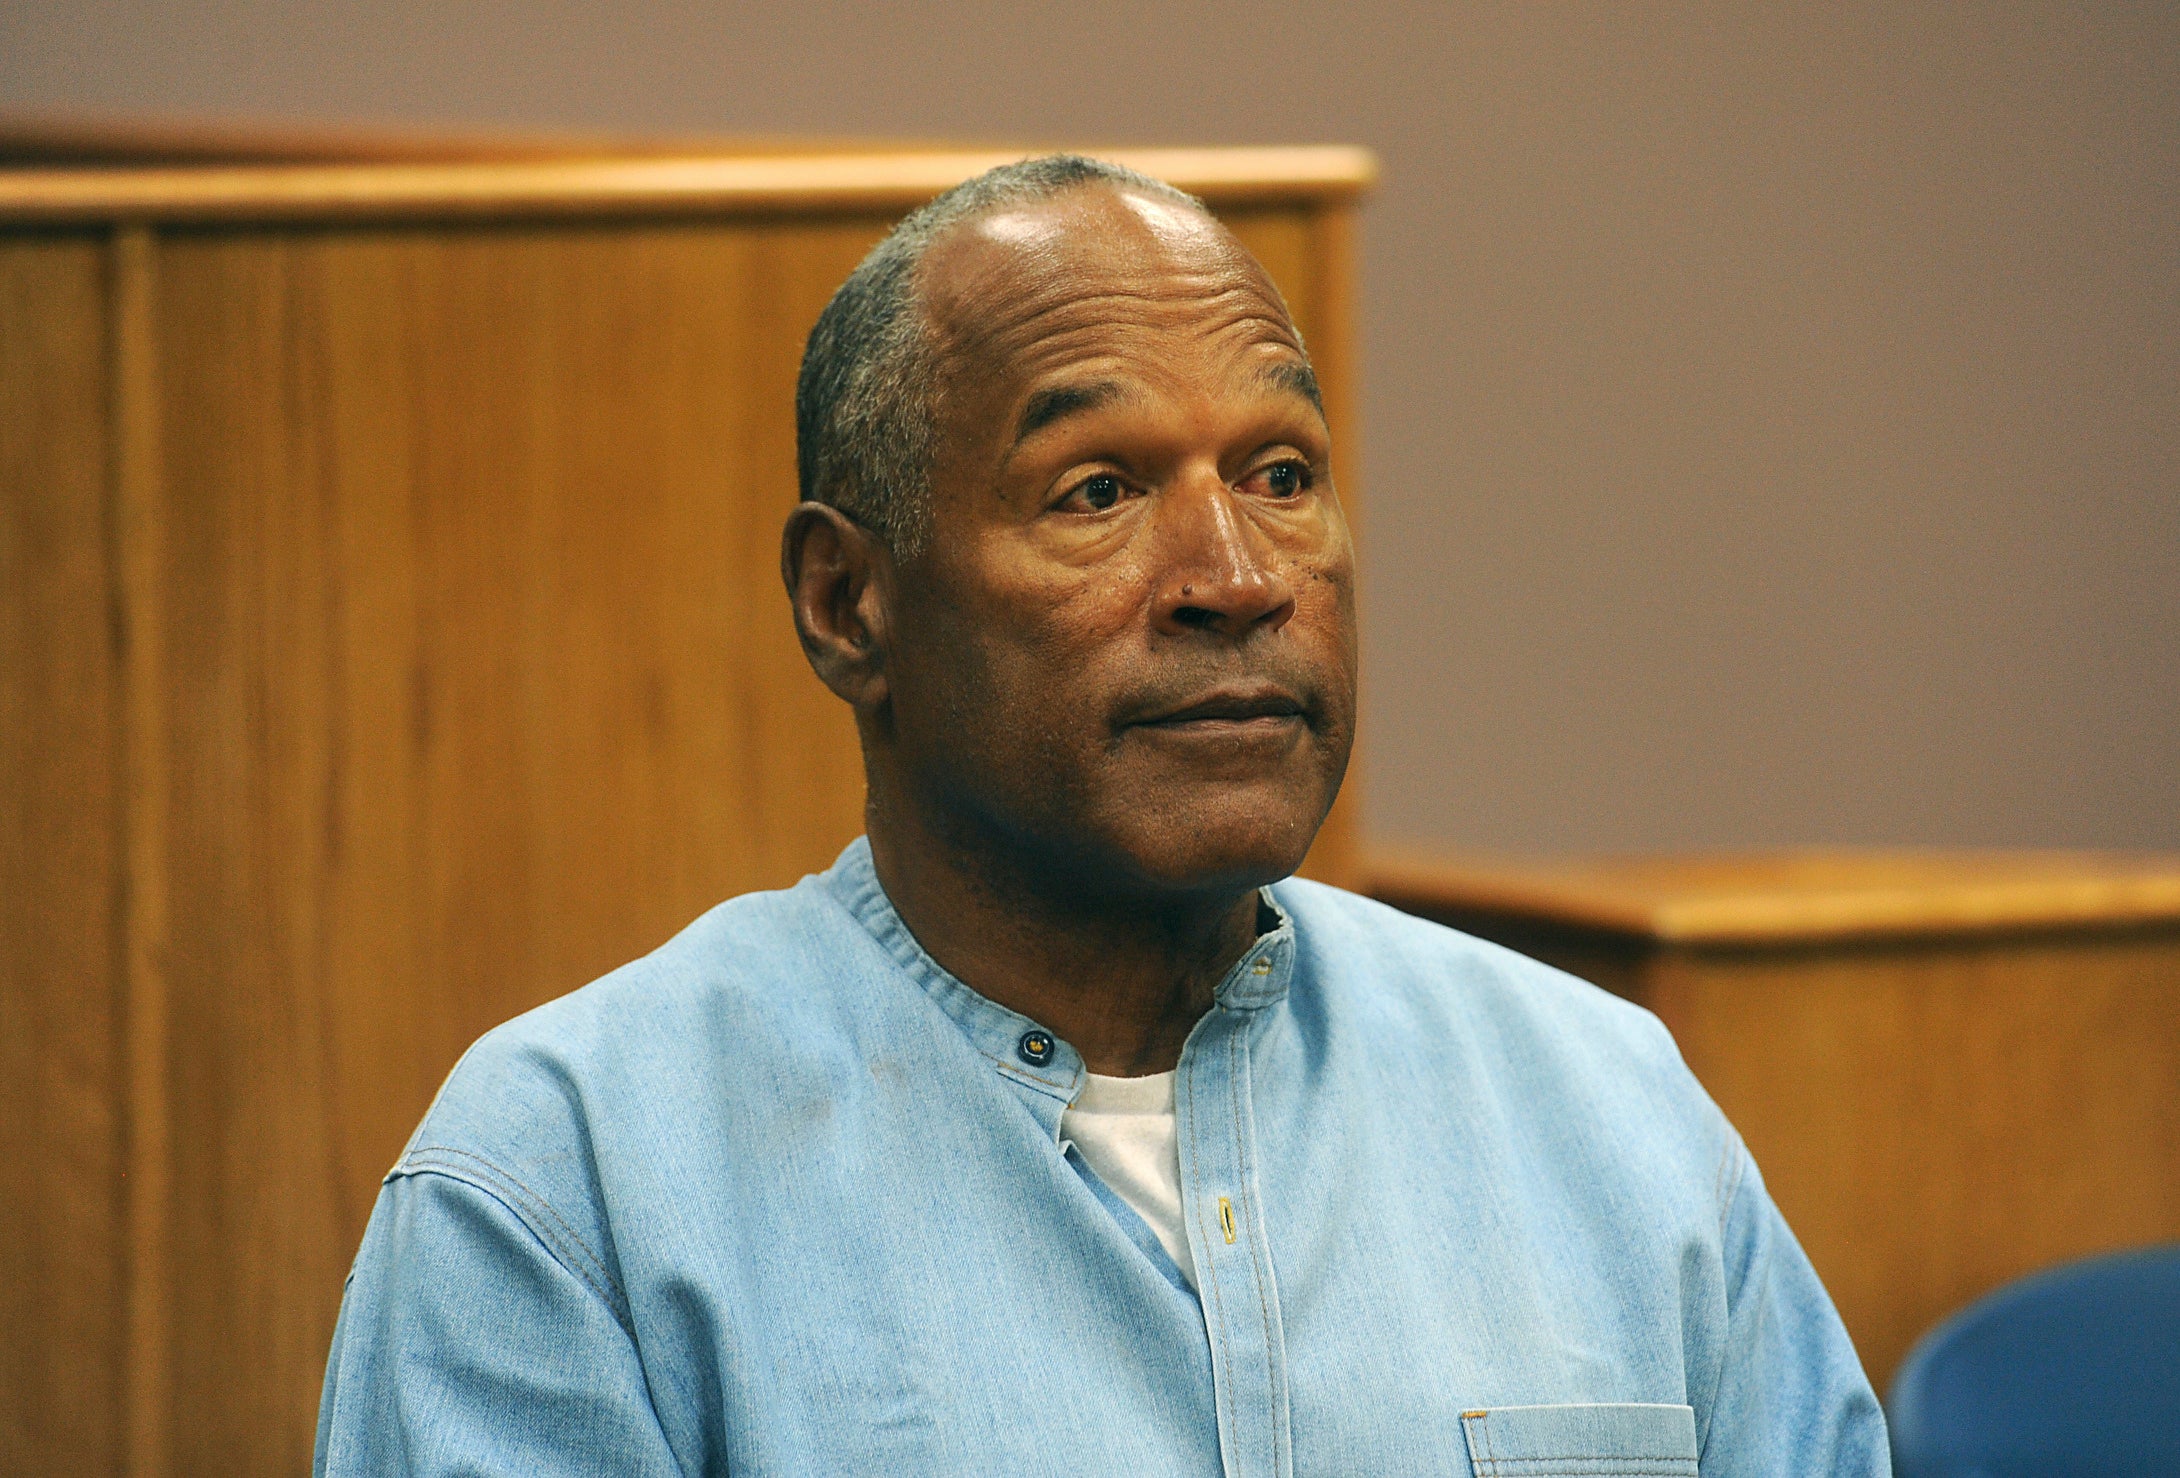 O.J. Simpson: Hall of Famer's No. 32 Bills jersey issued to